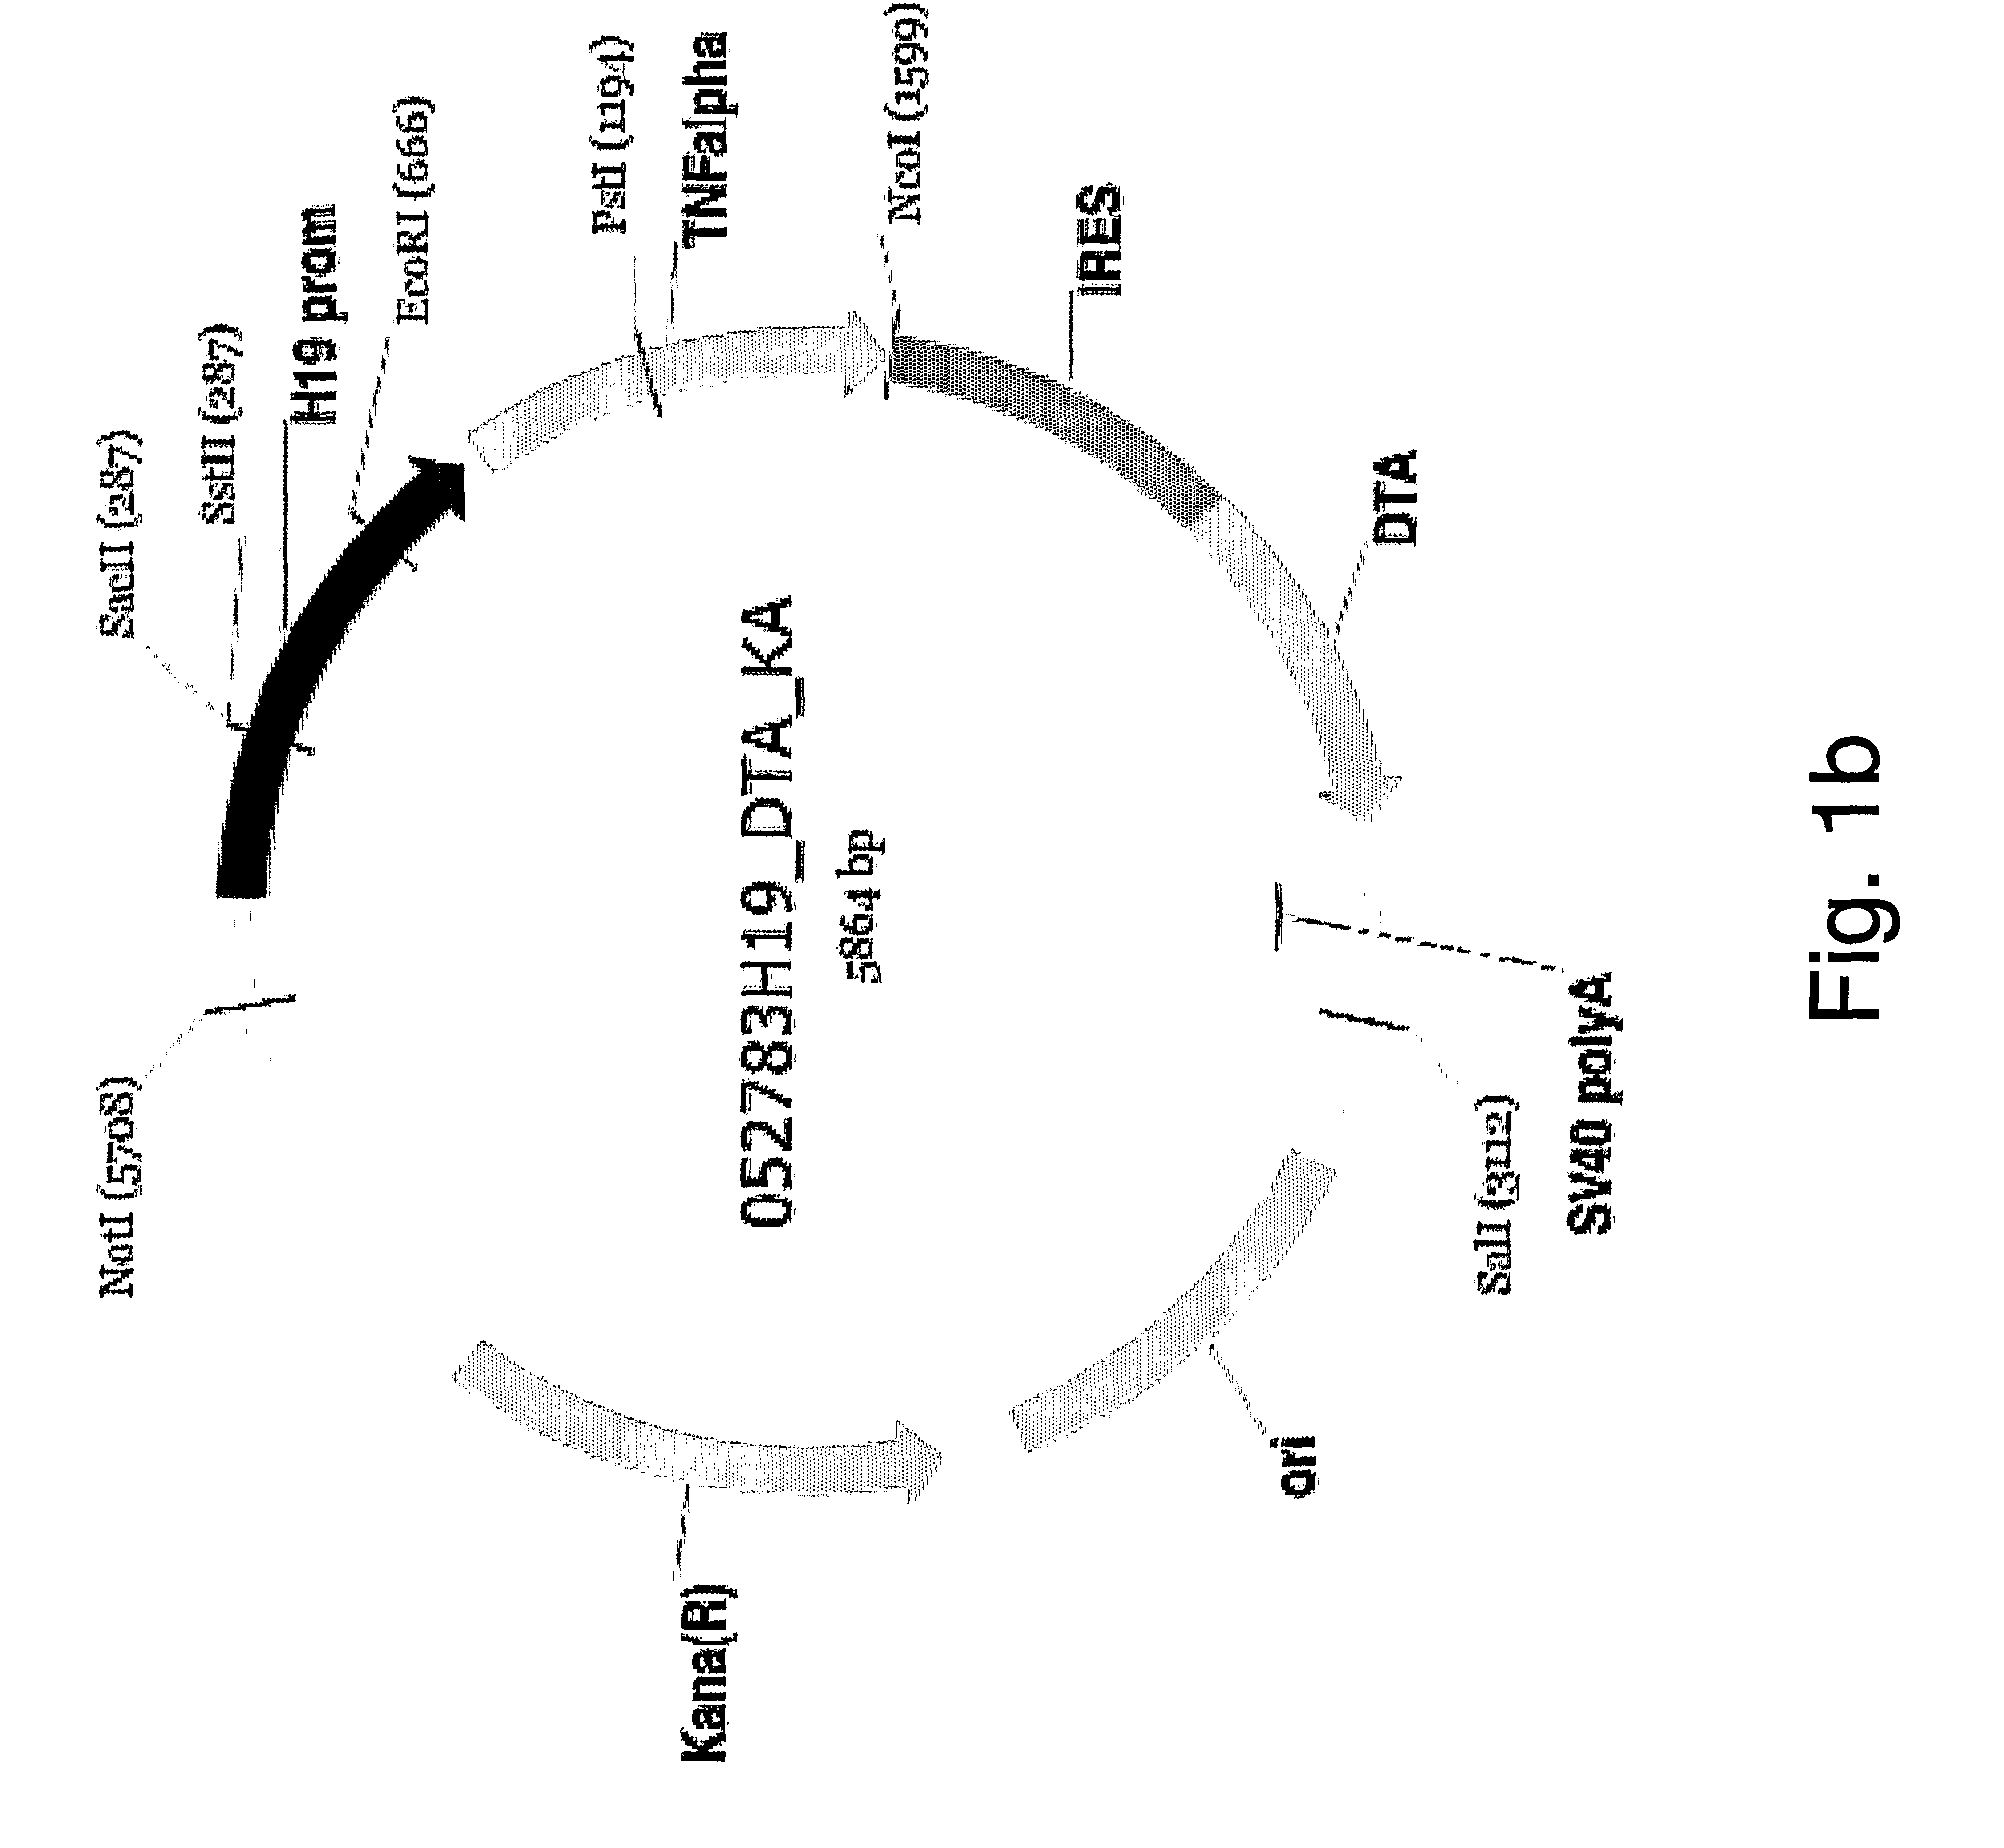 Nucleic acid constructs, pharmaceutical compositions and methods of using same for treating cancer